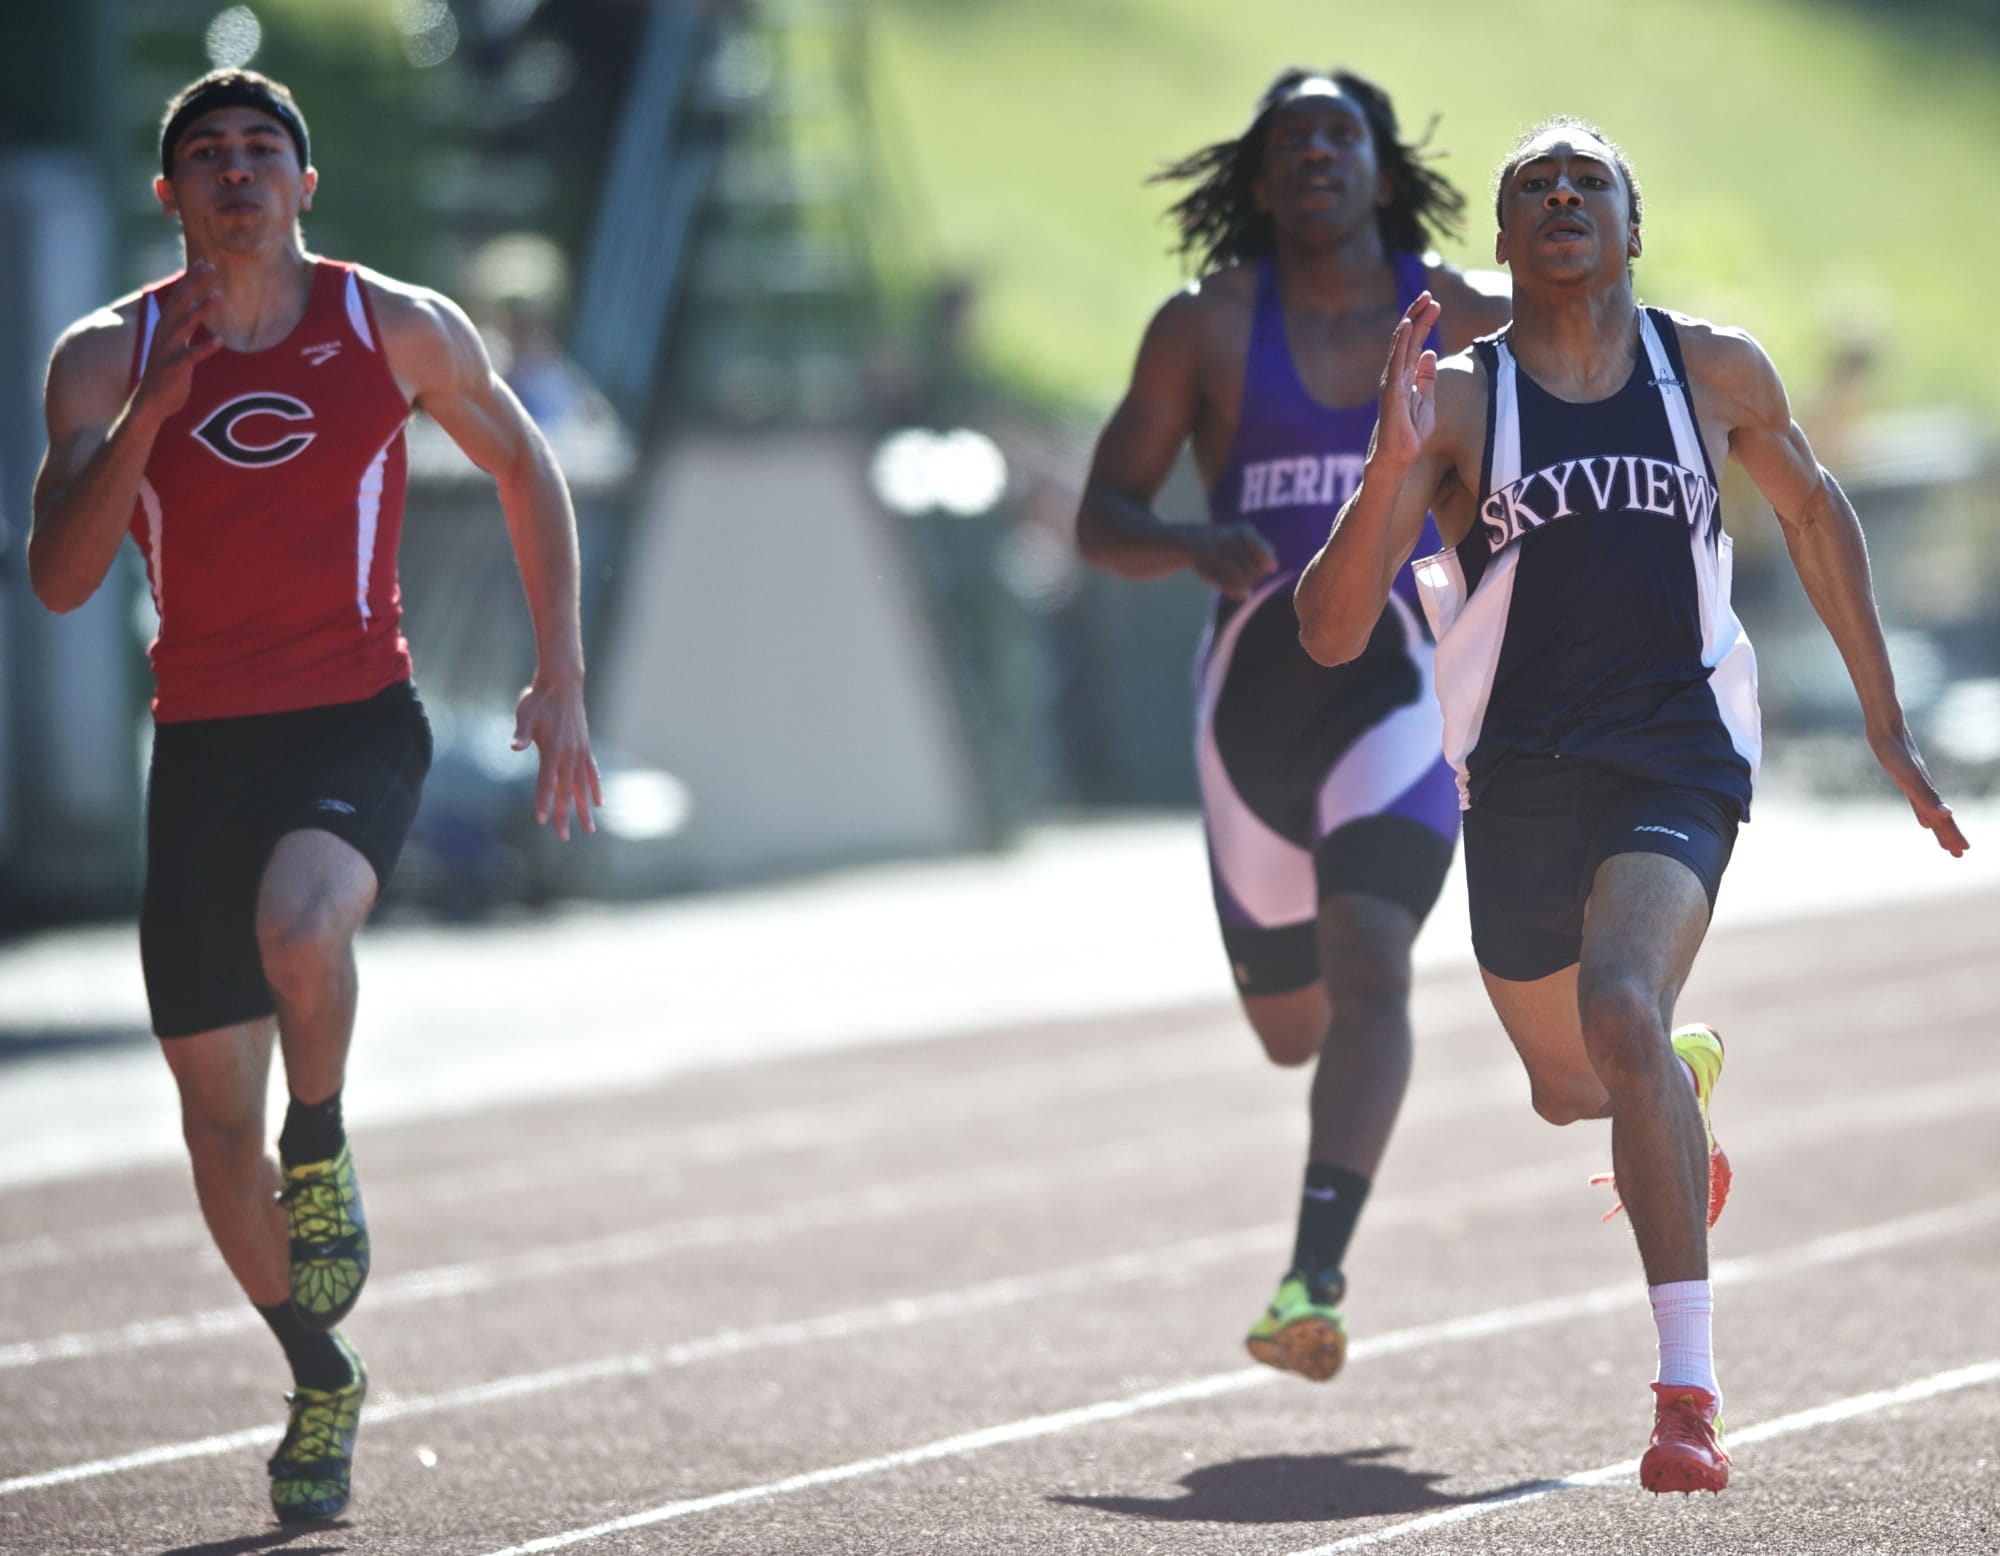 Skyview senior Kevin Washington, right, finishes first in the 4A boys 200 meters.